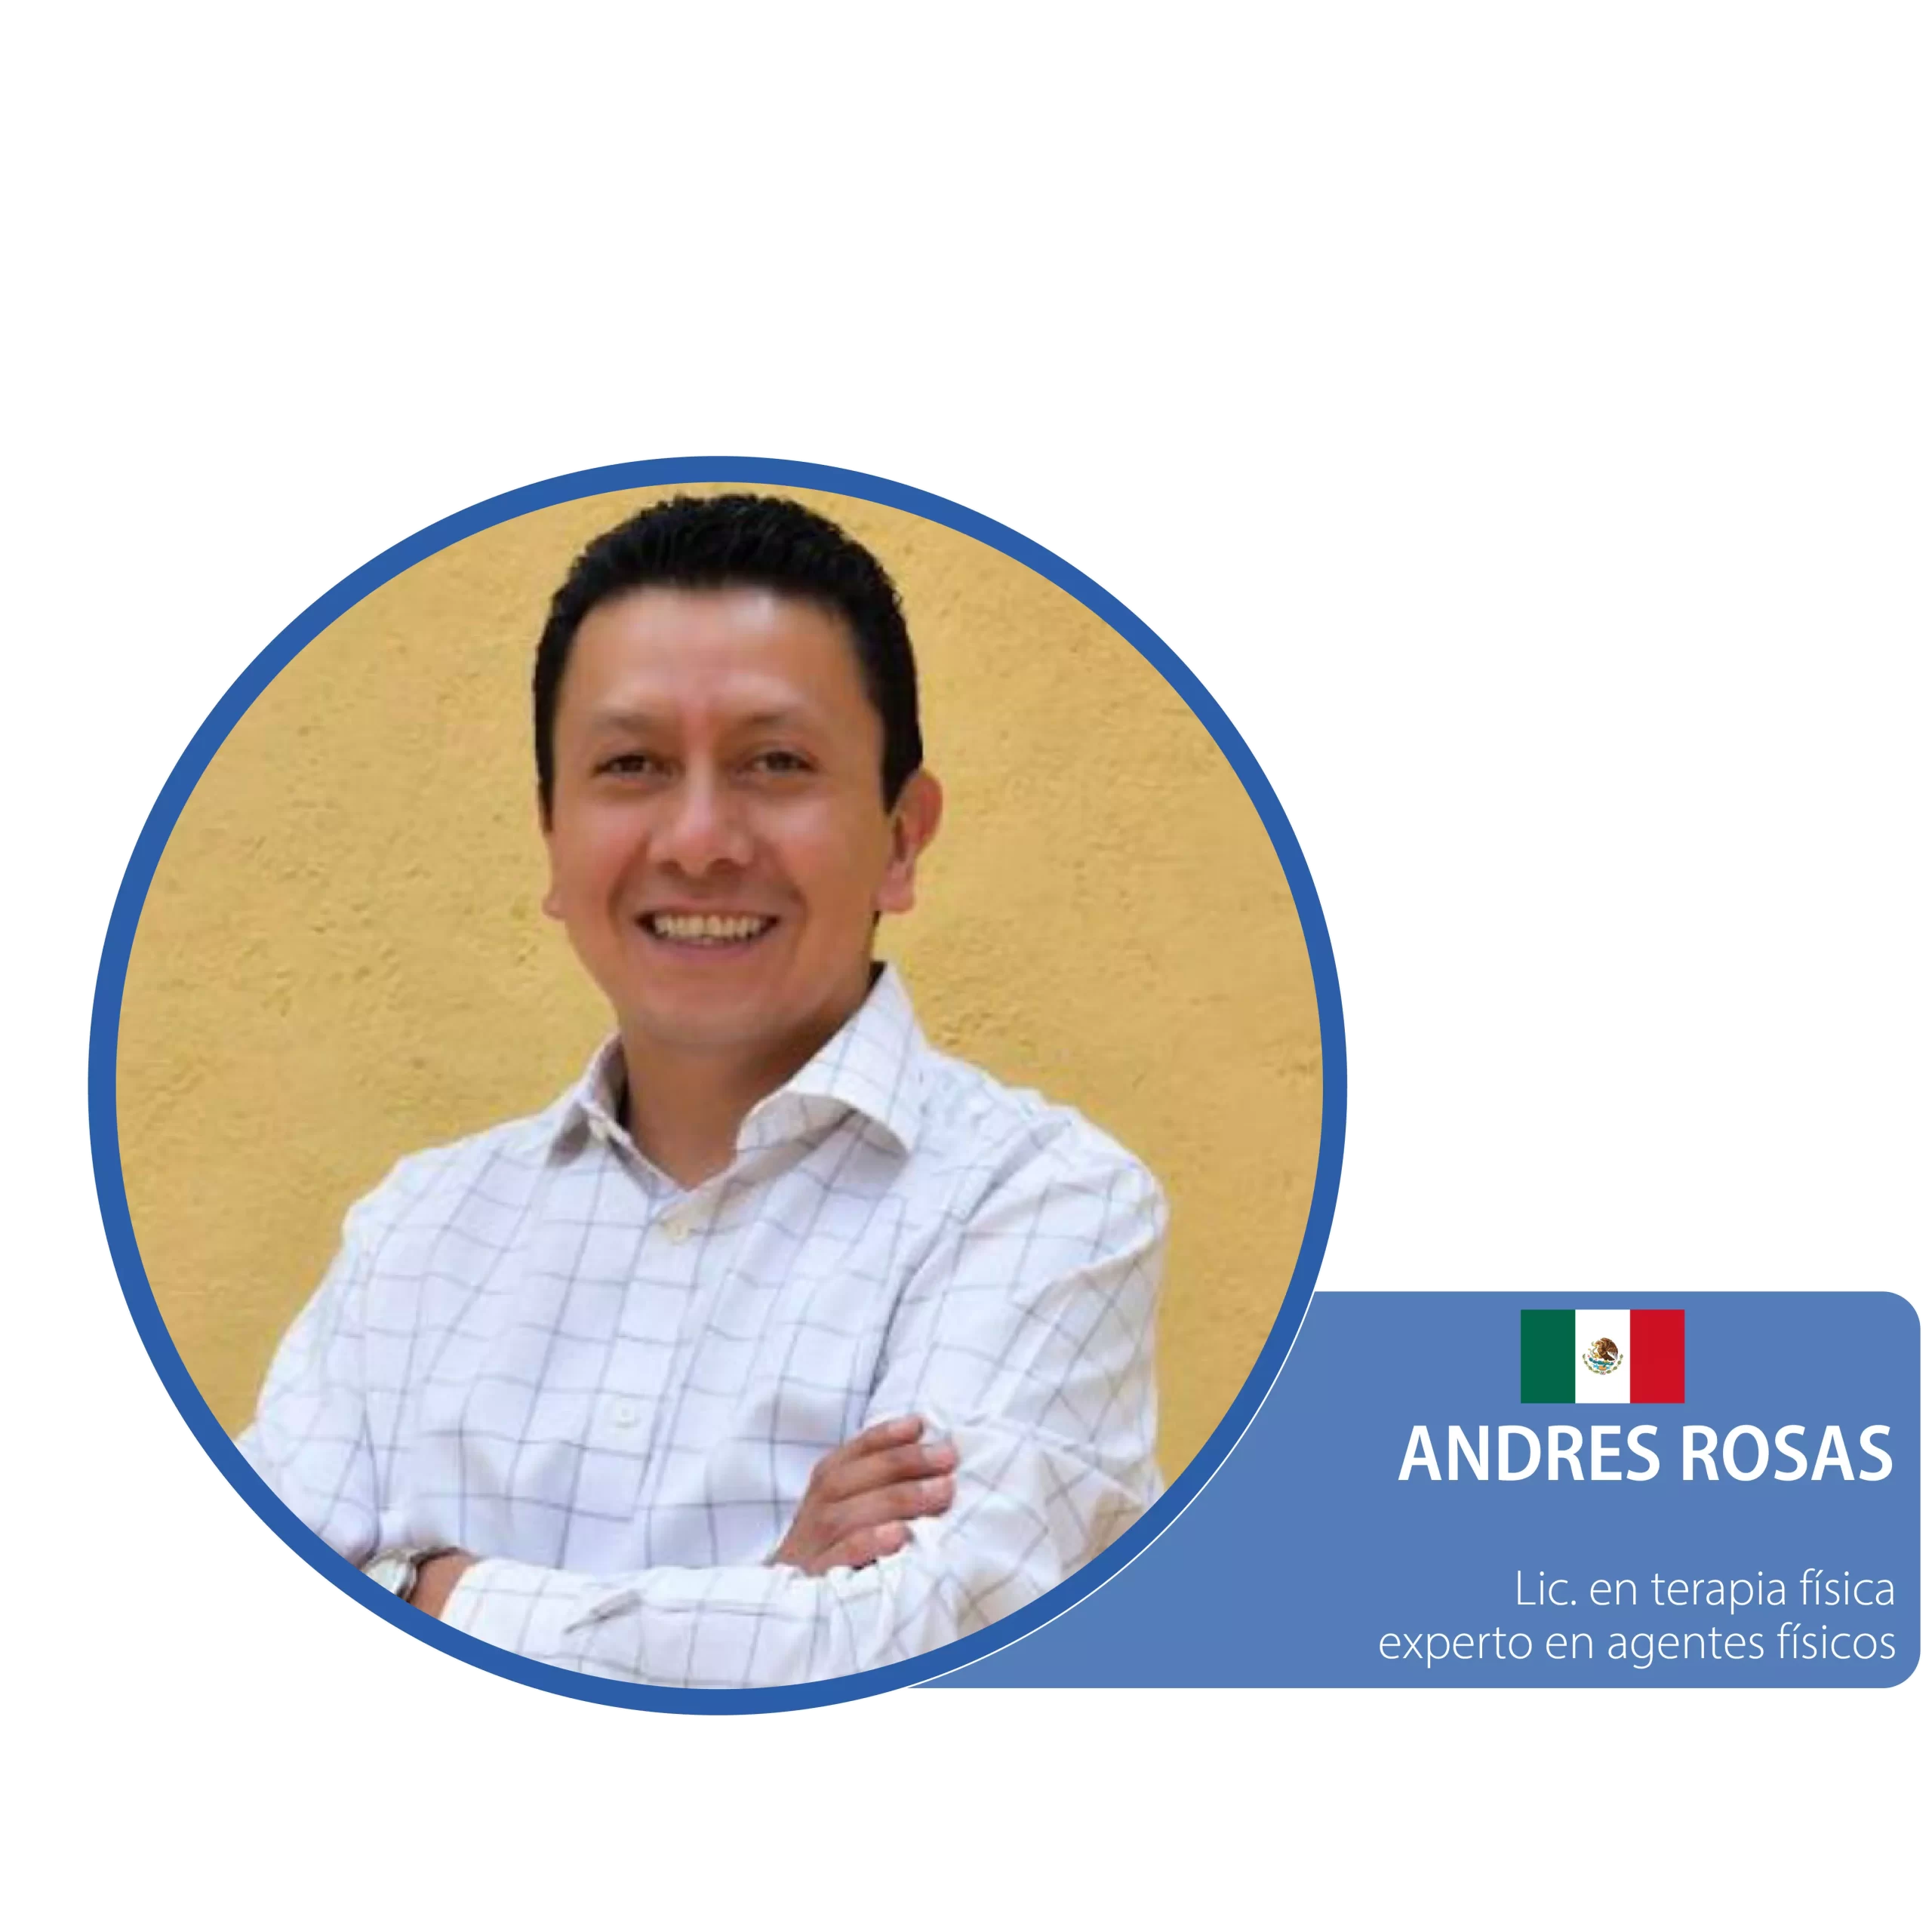 Andres Rosas